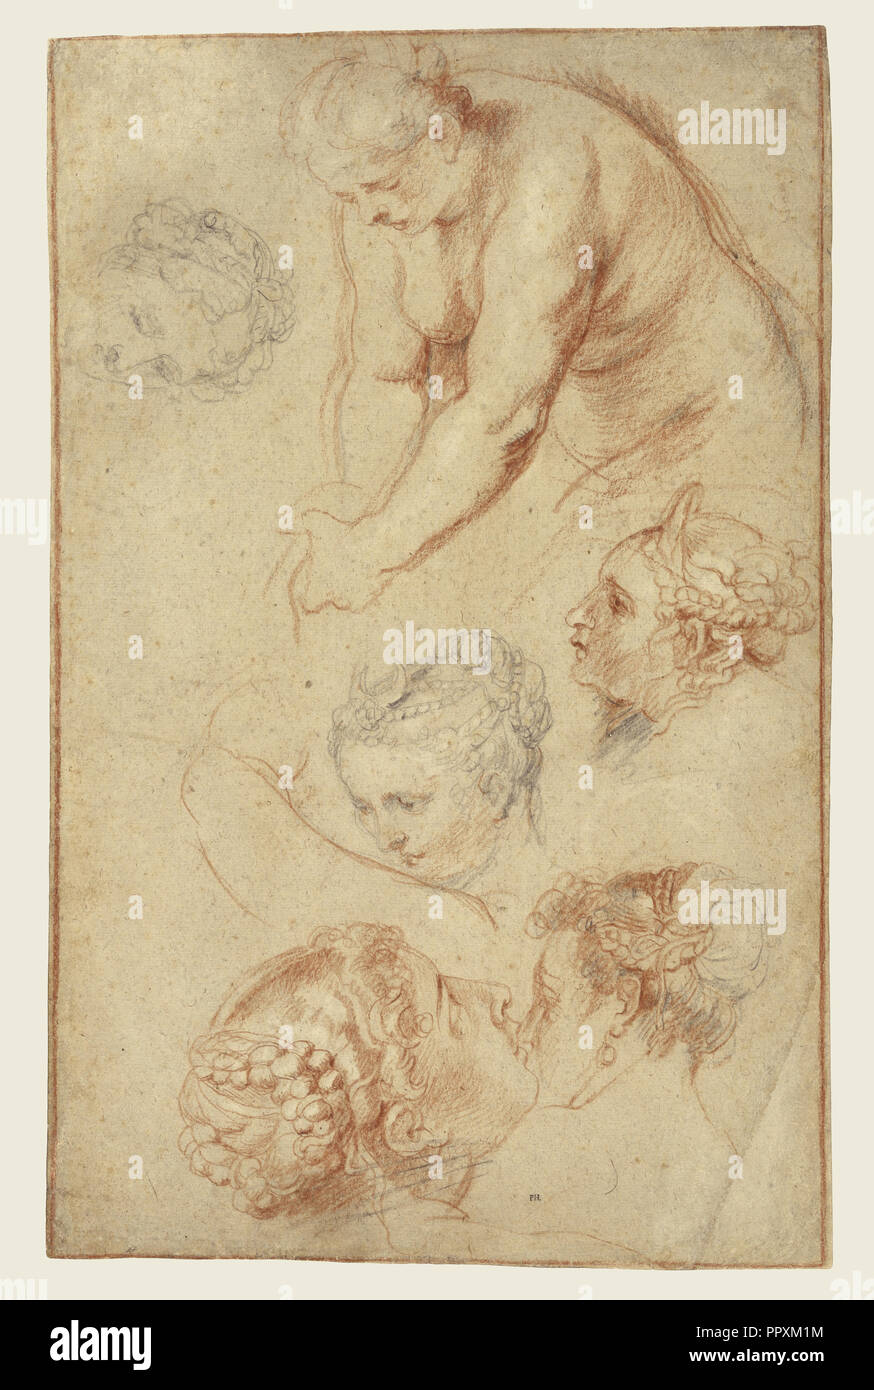 Studies of Women; Peter Paul Rubens, Flemish, 1577 - 1640, 1628; Black, red, and white chalk, lower right corner replaced Stock Photo